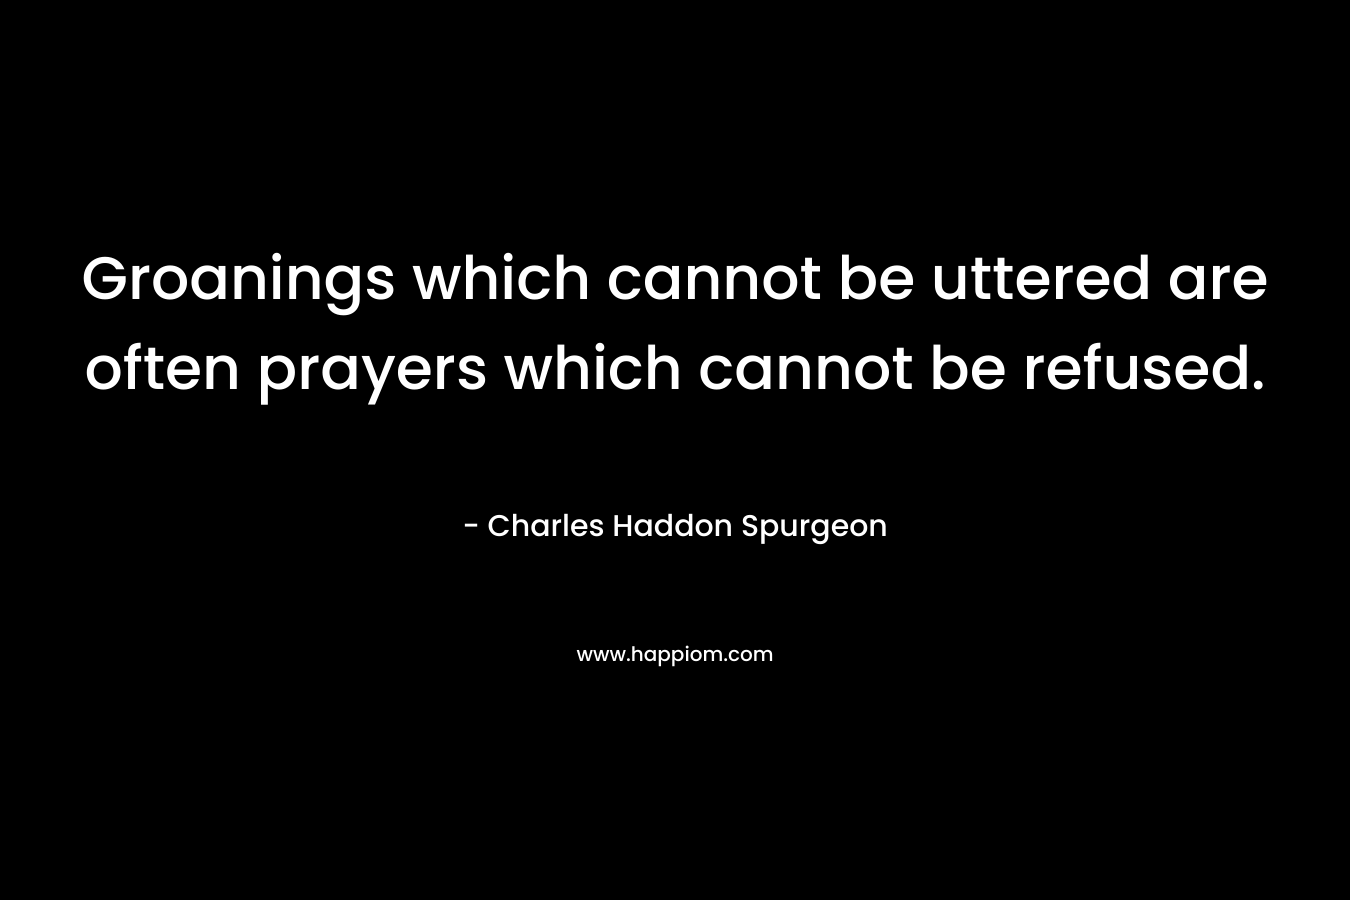 Groanings which cannot be uttered are often prayers which cannot be refused. – Charles Haddon Spurgeon